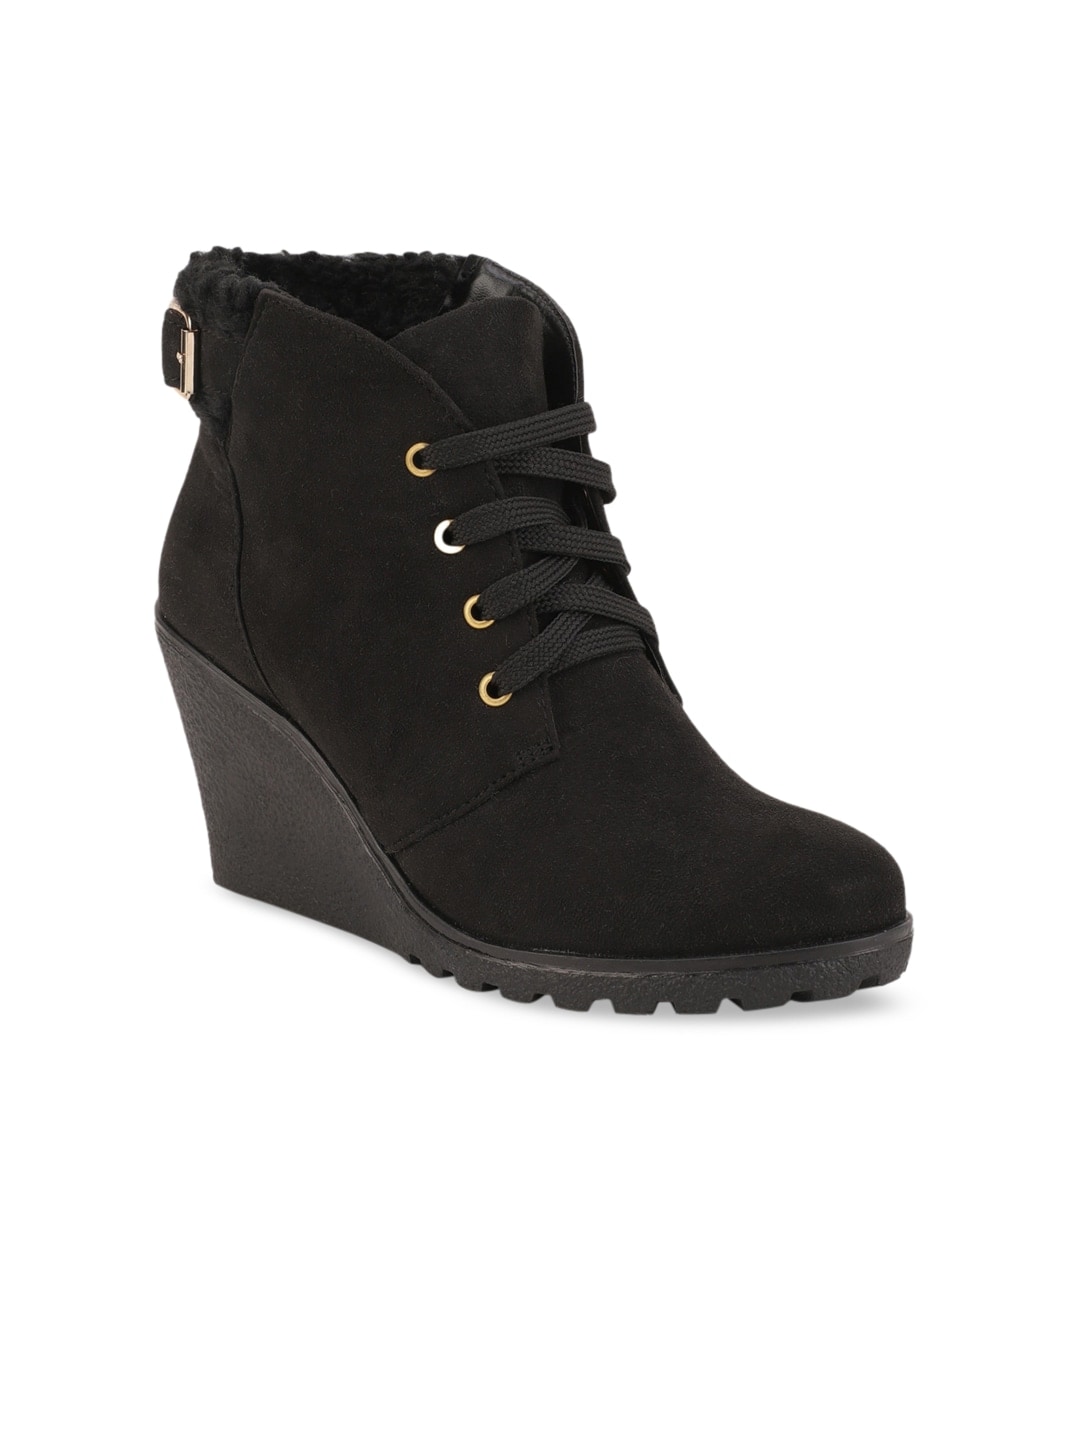 Bruno Manetti Women Black Solid Mid-Top Heeled Suede Boots Price in India